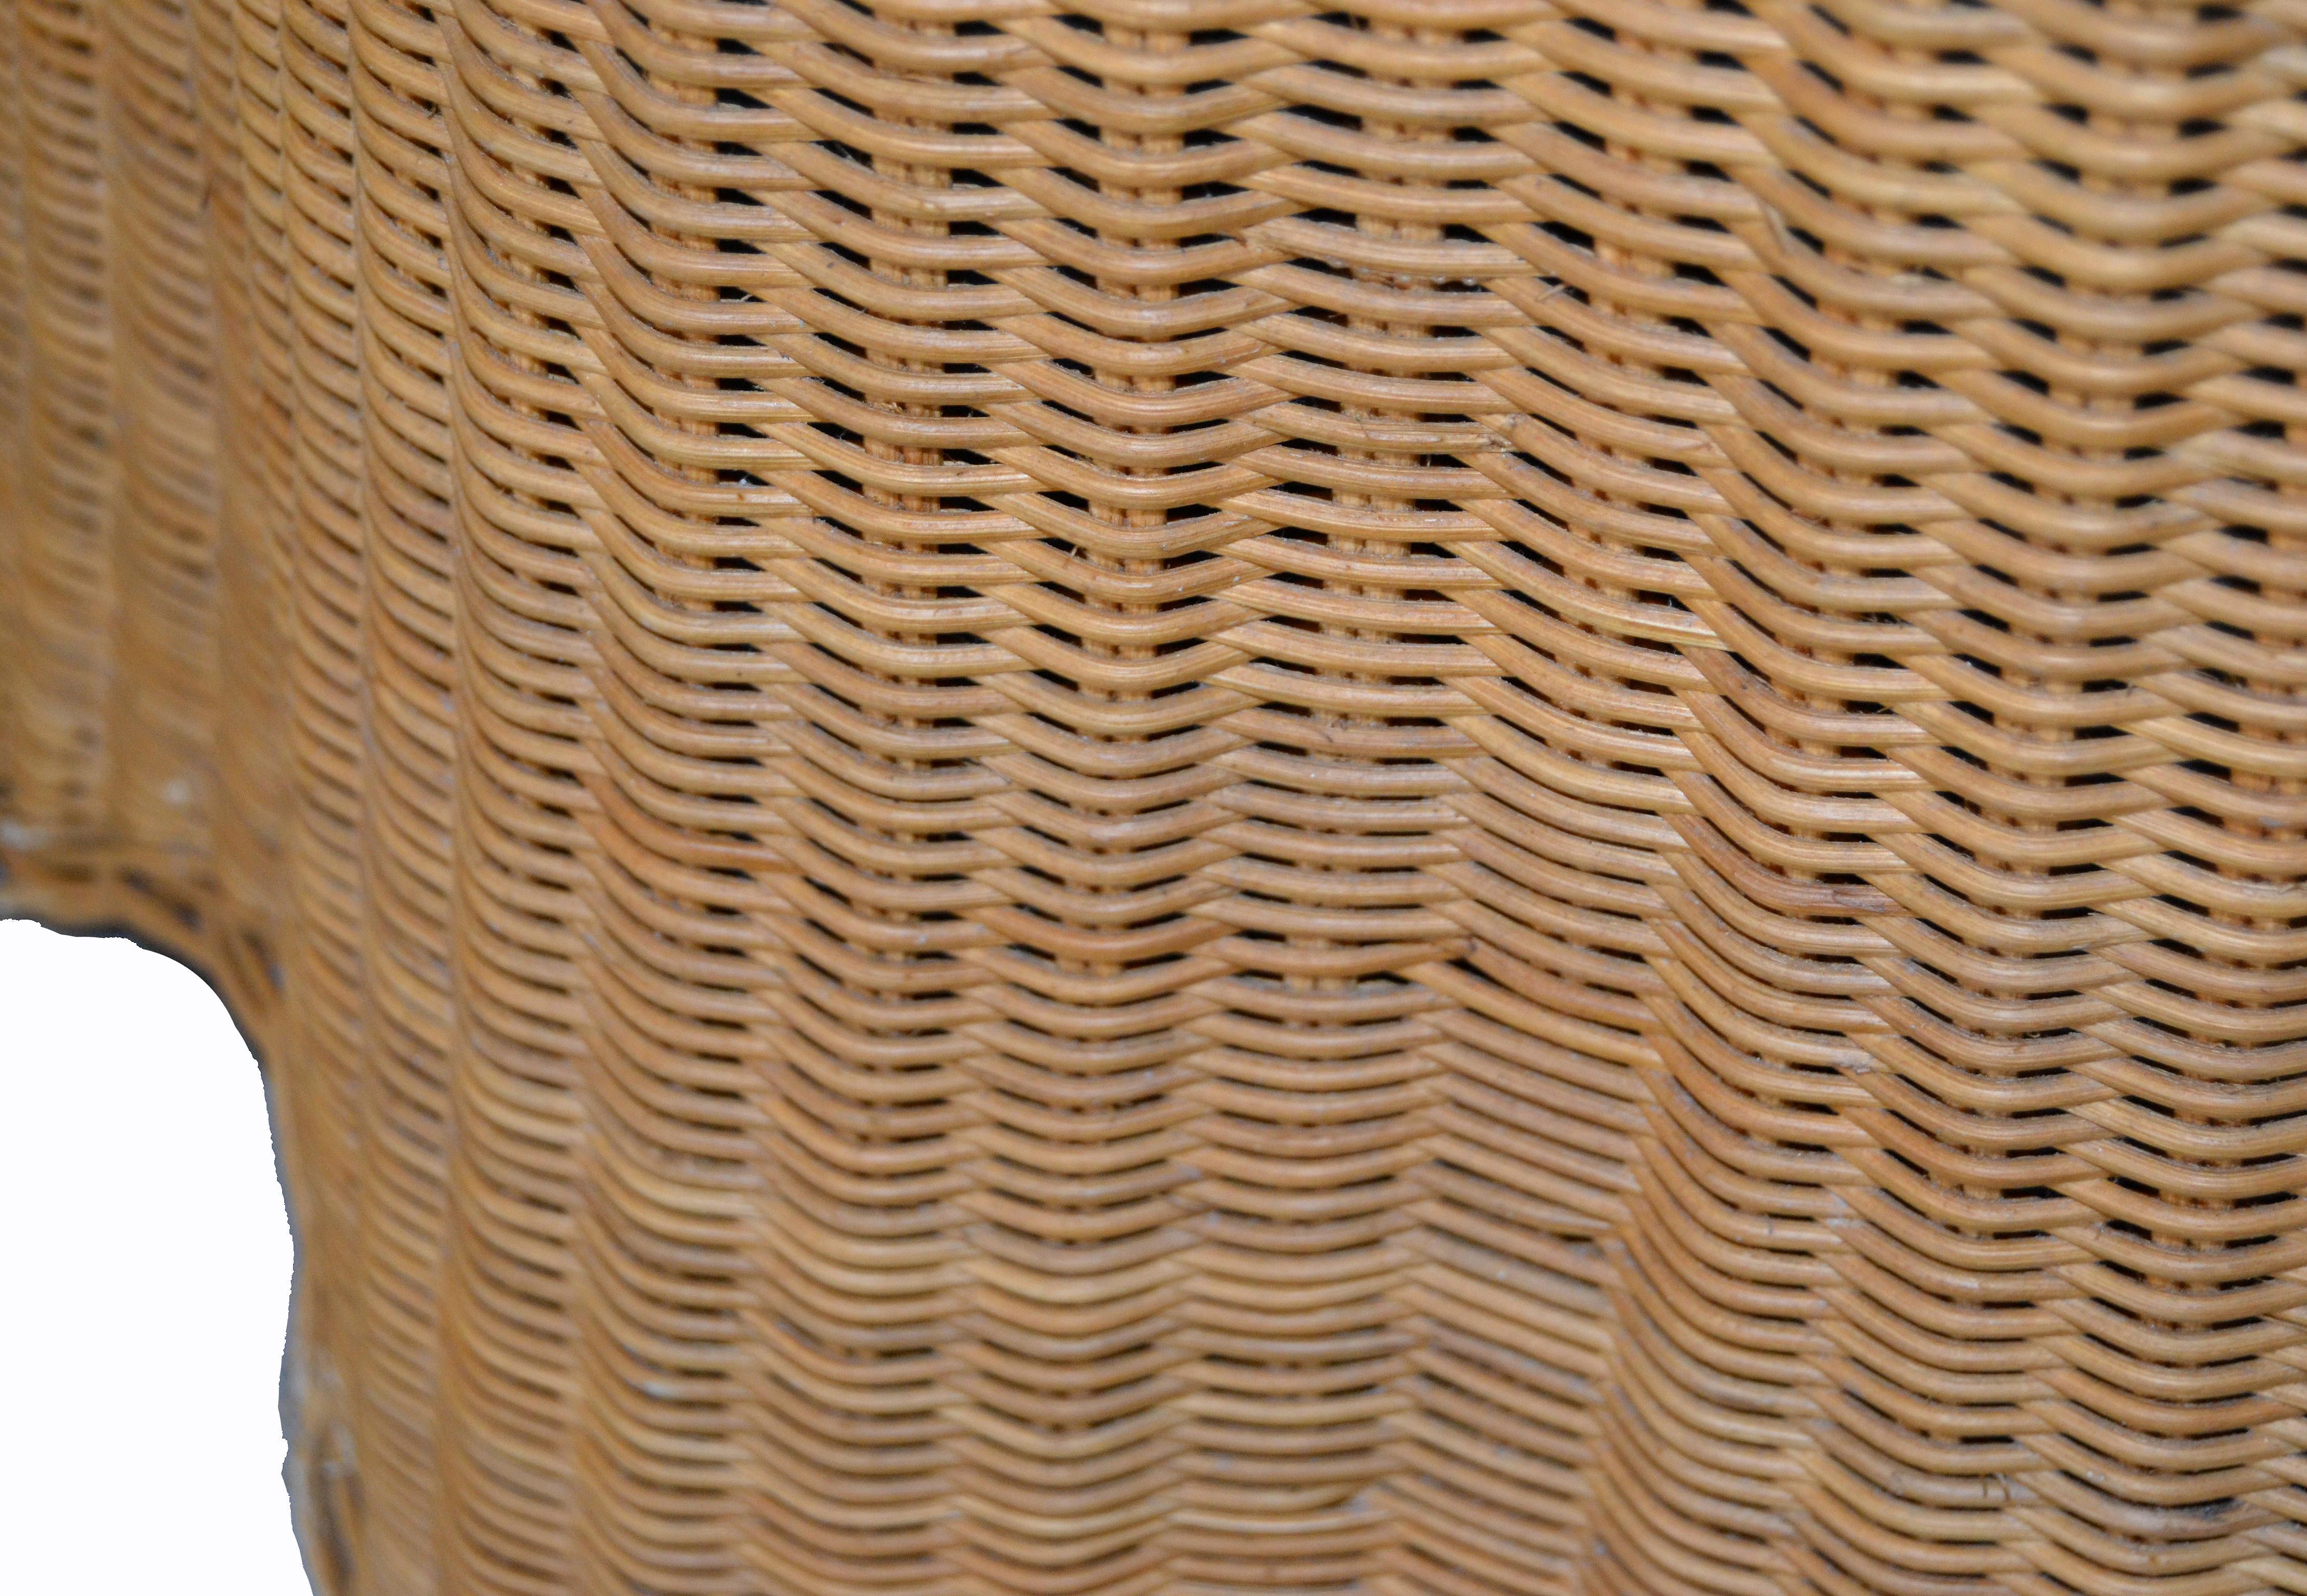 Hand-Woven Mid-Century Modern Round Handwoven Tan Rattan / Wicker Coffee Table, Side Table